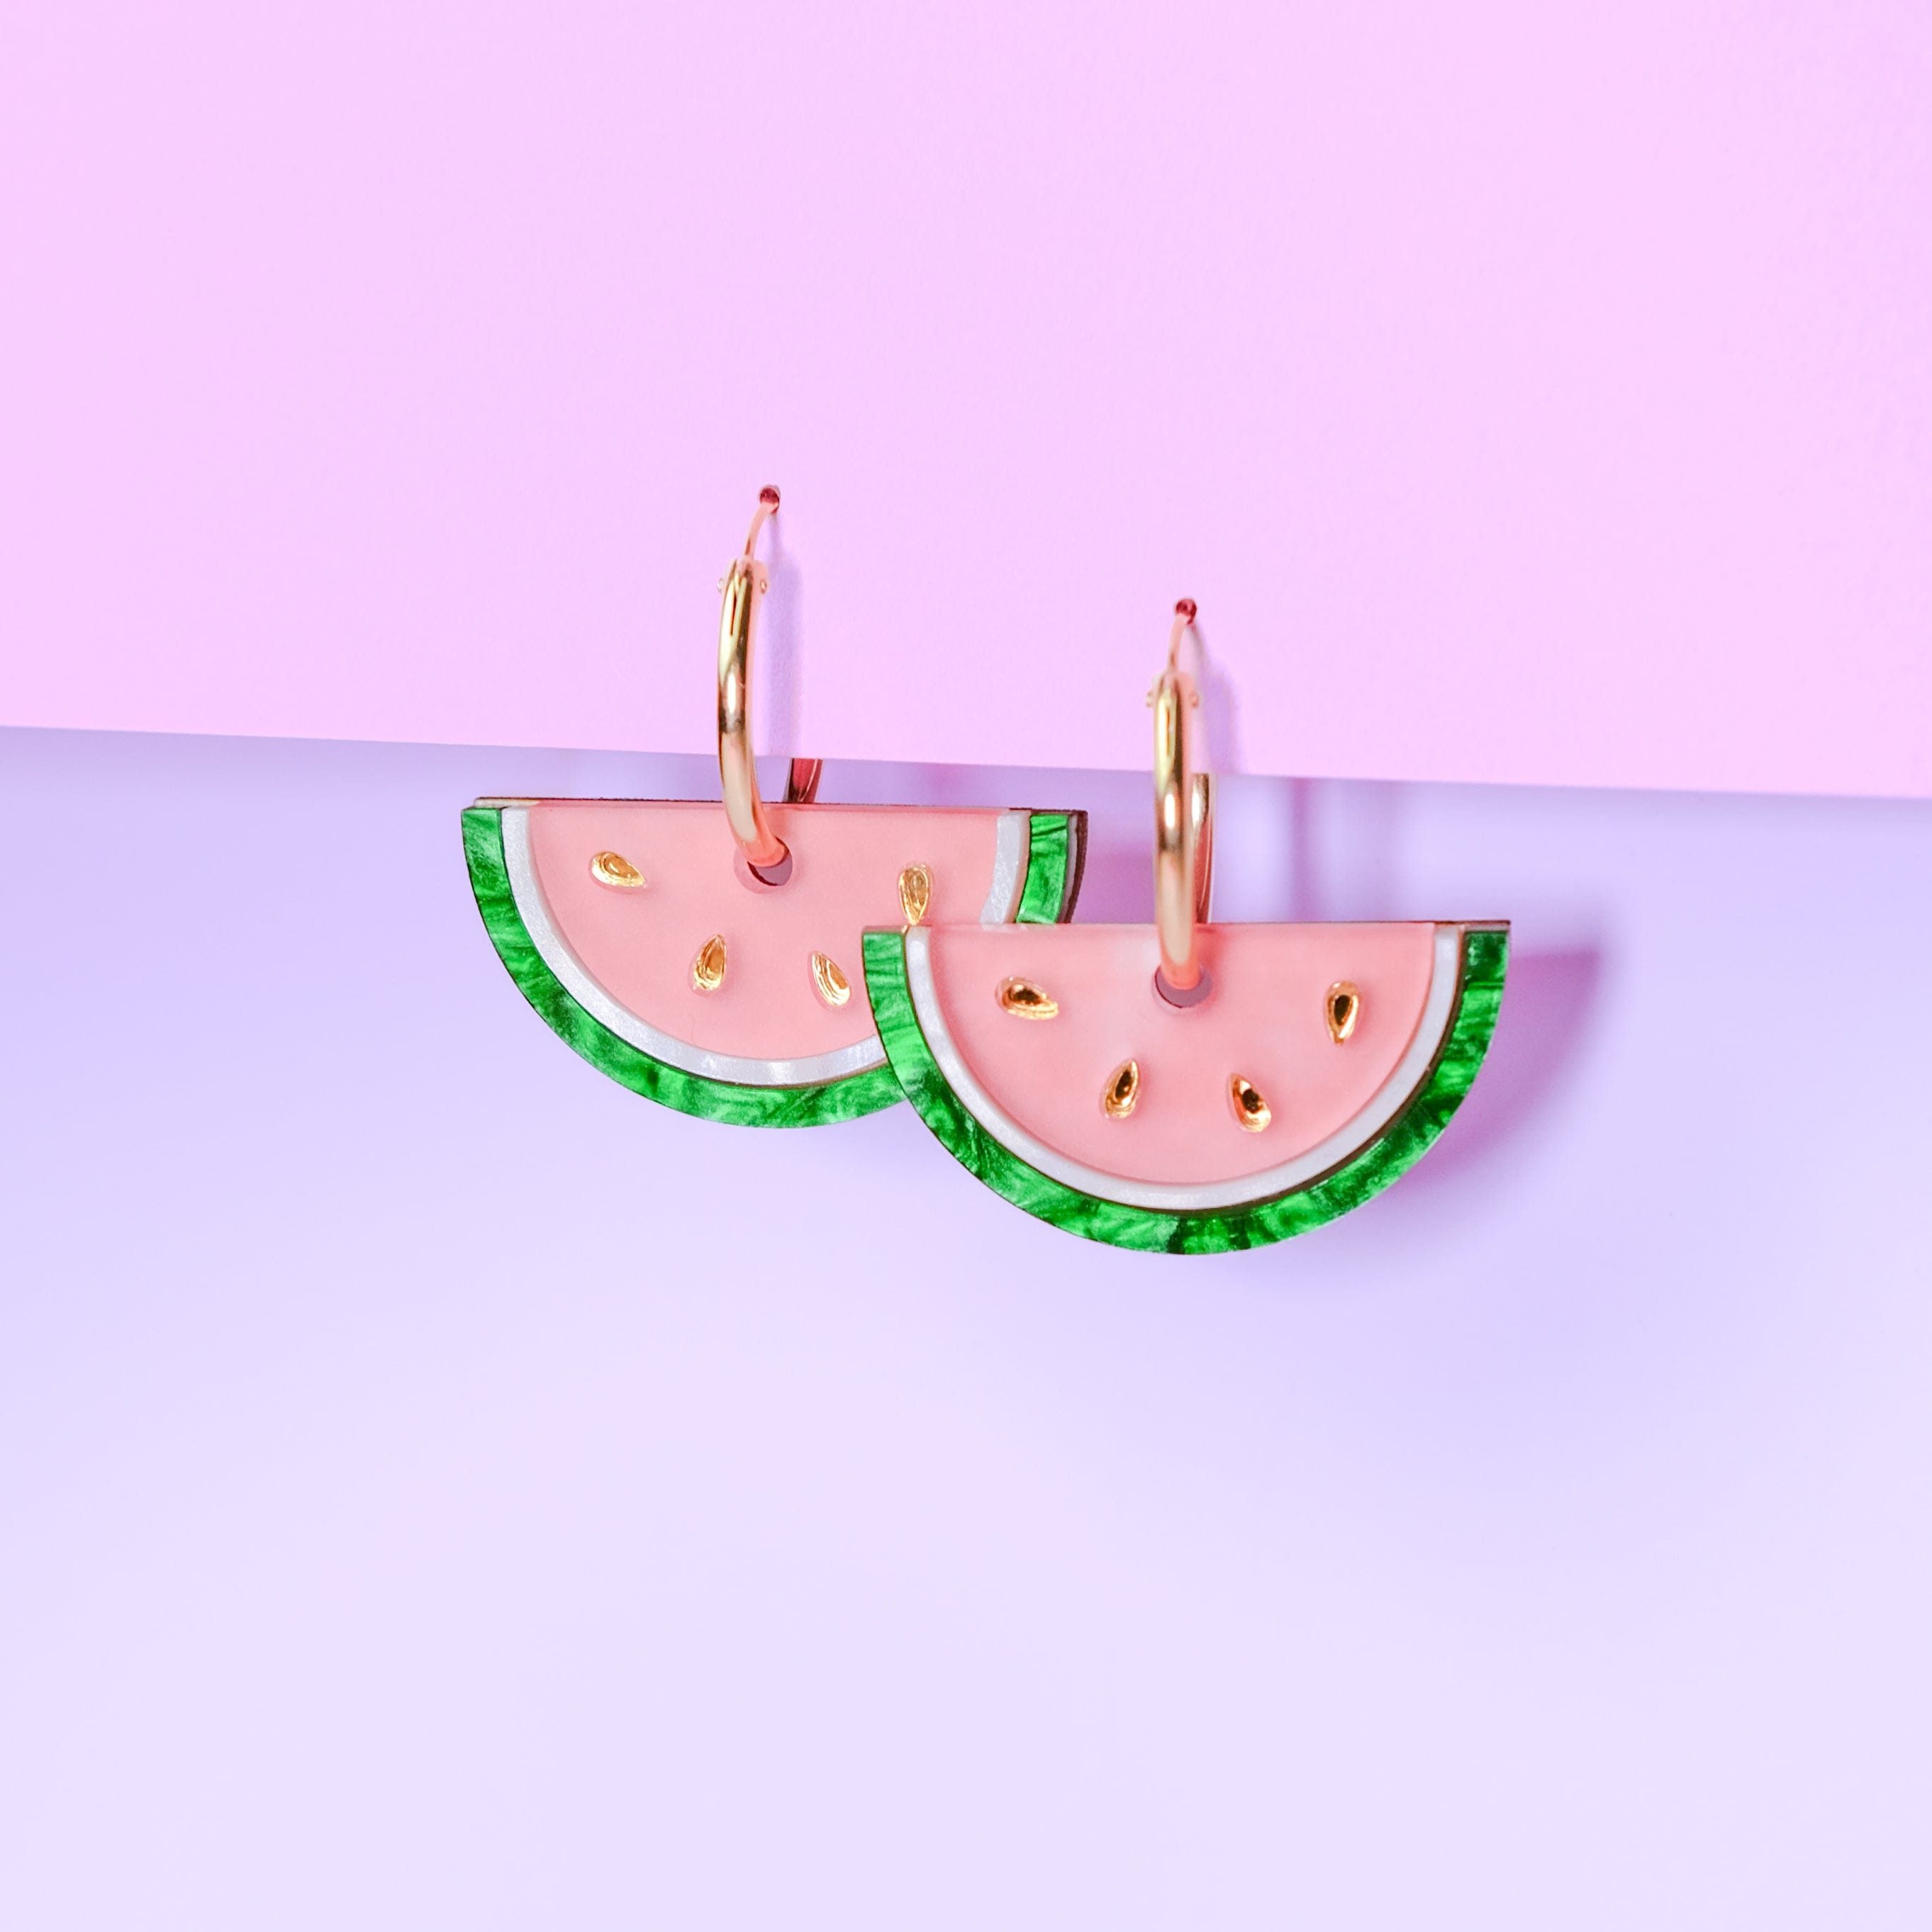 Watermelon Slice gold-filled hoop earrings for summer and spring!